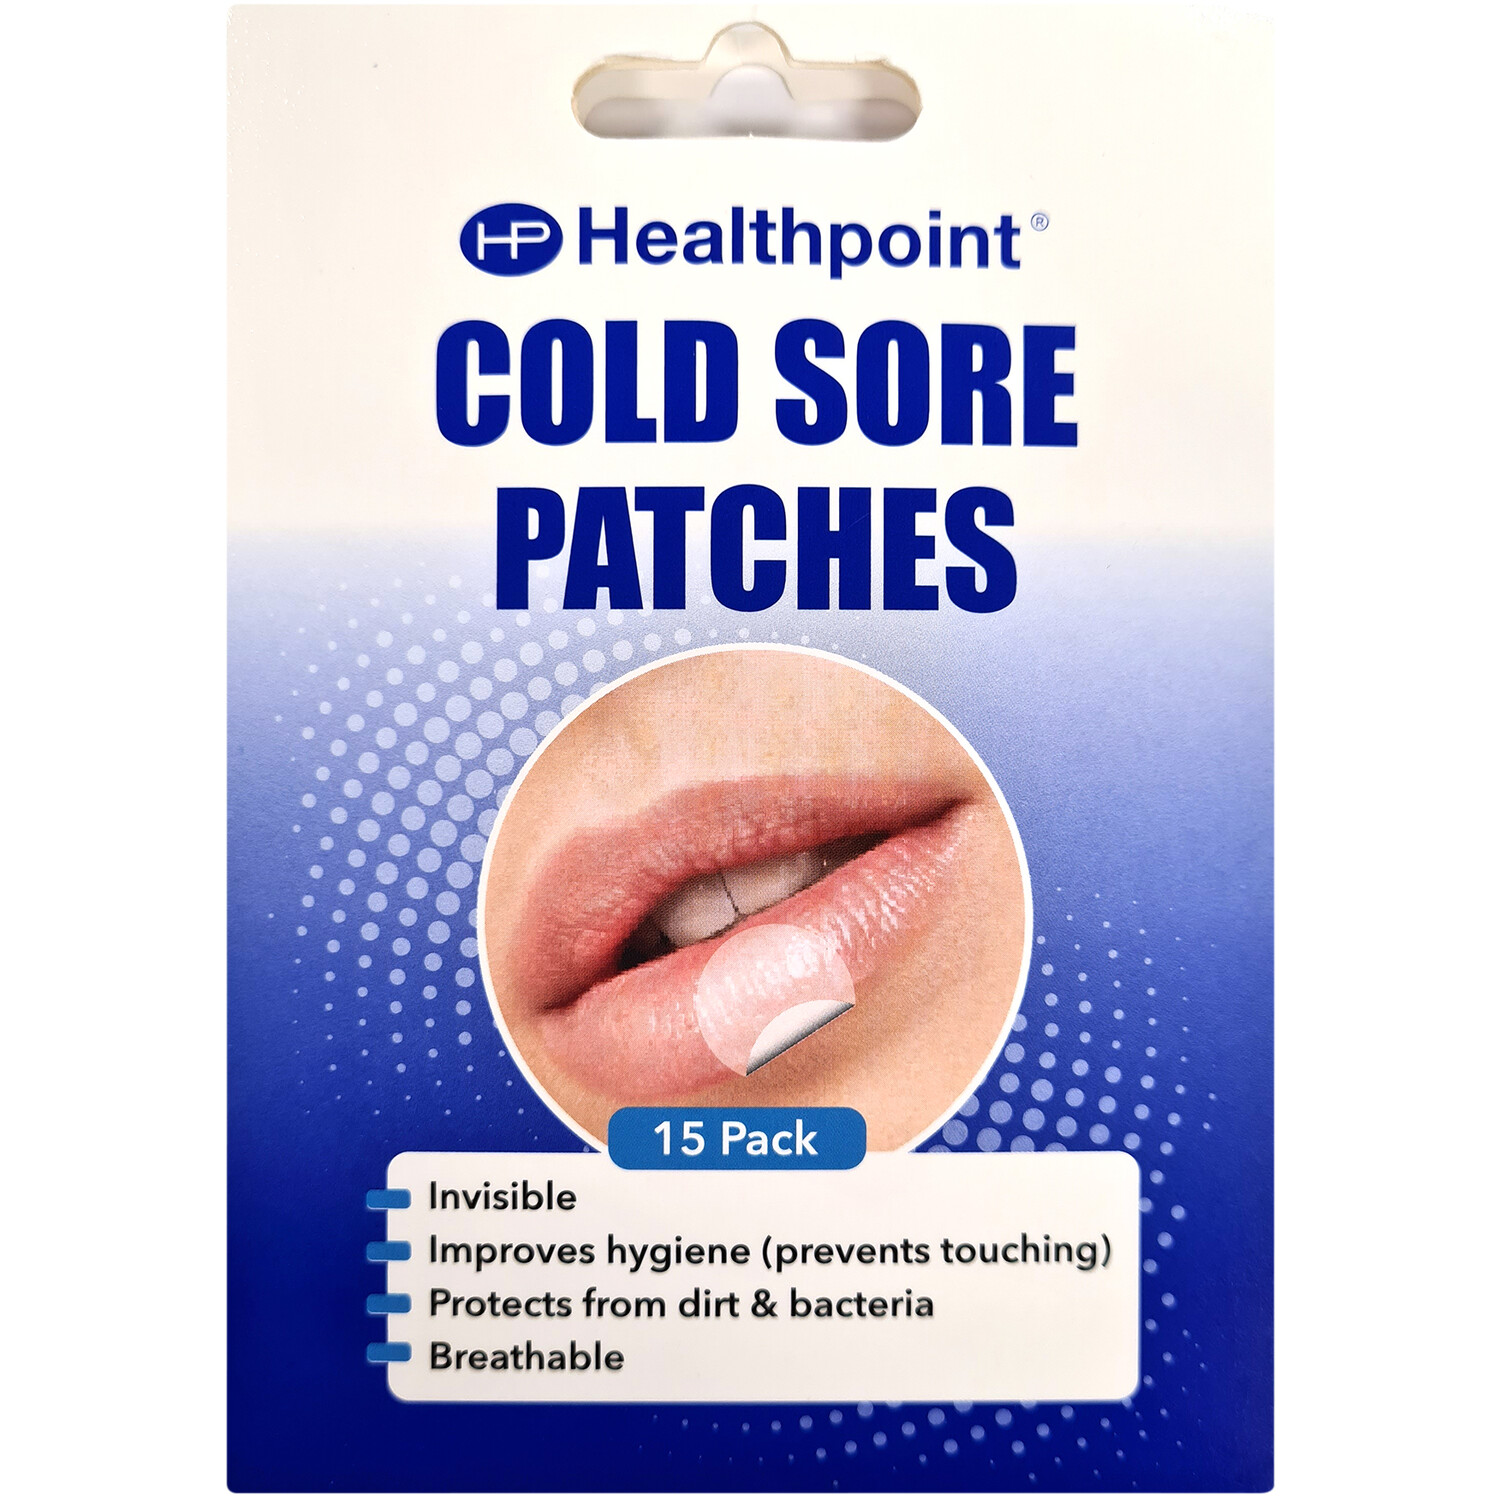 Pack of 15 Healthpoint Cold Sore Patches - Blue Image